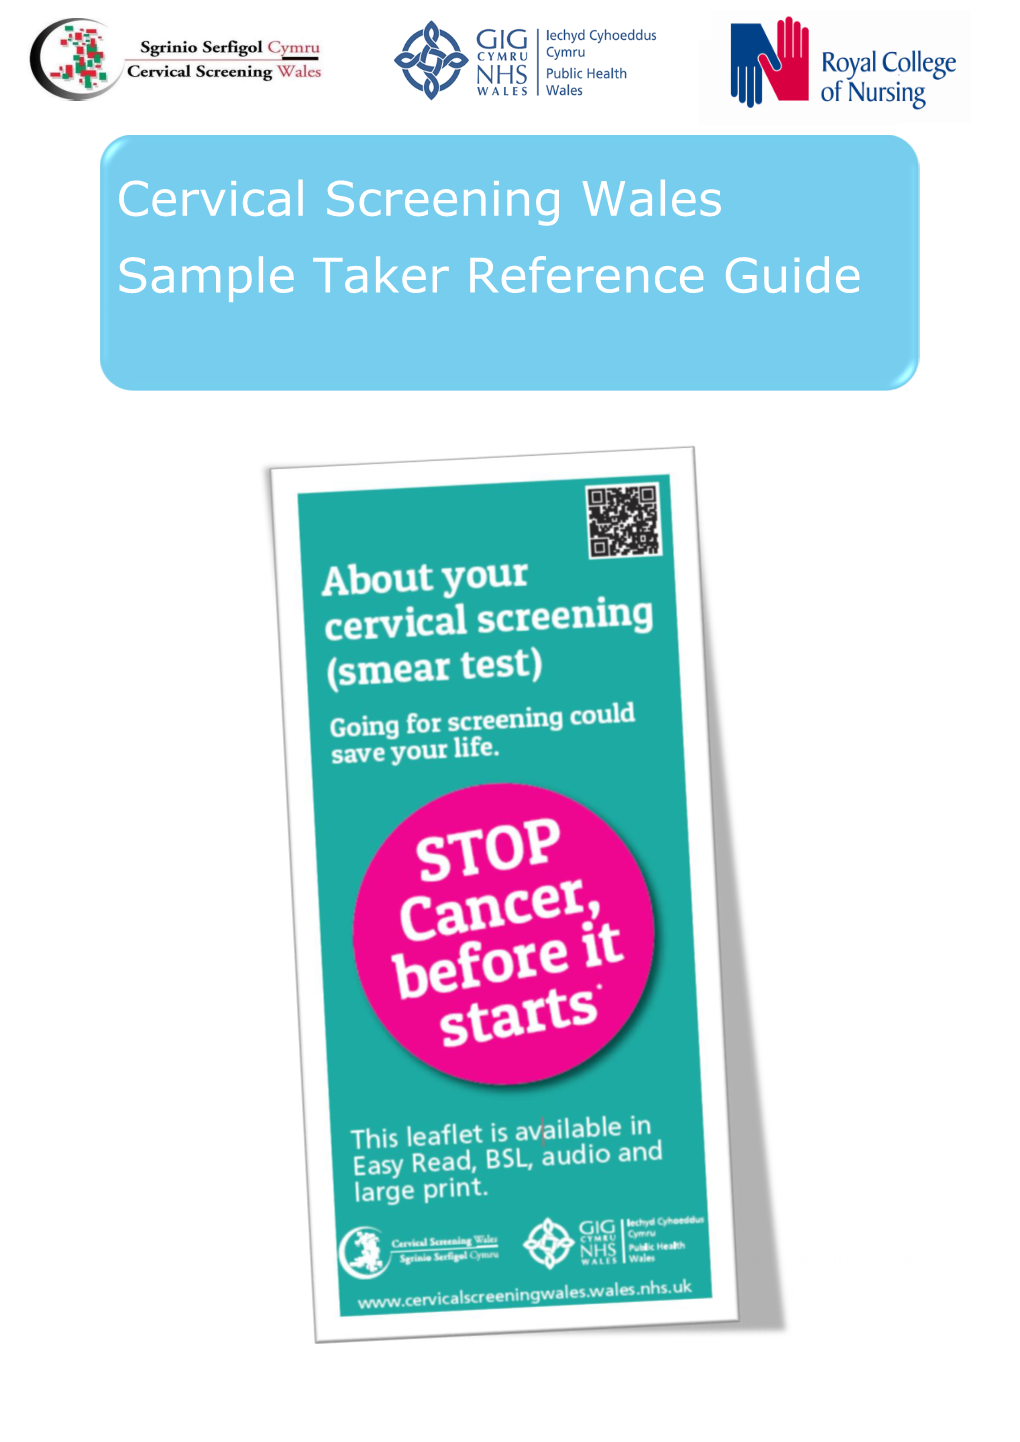 Cervical Screening Wales – Sample Taker Reference Guide